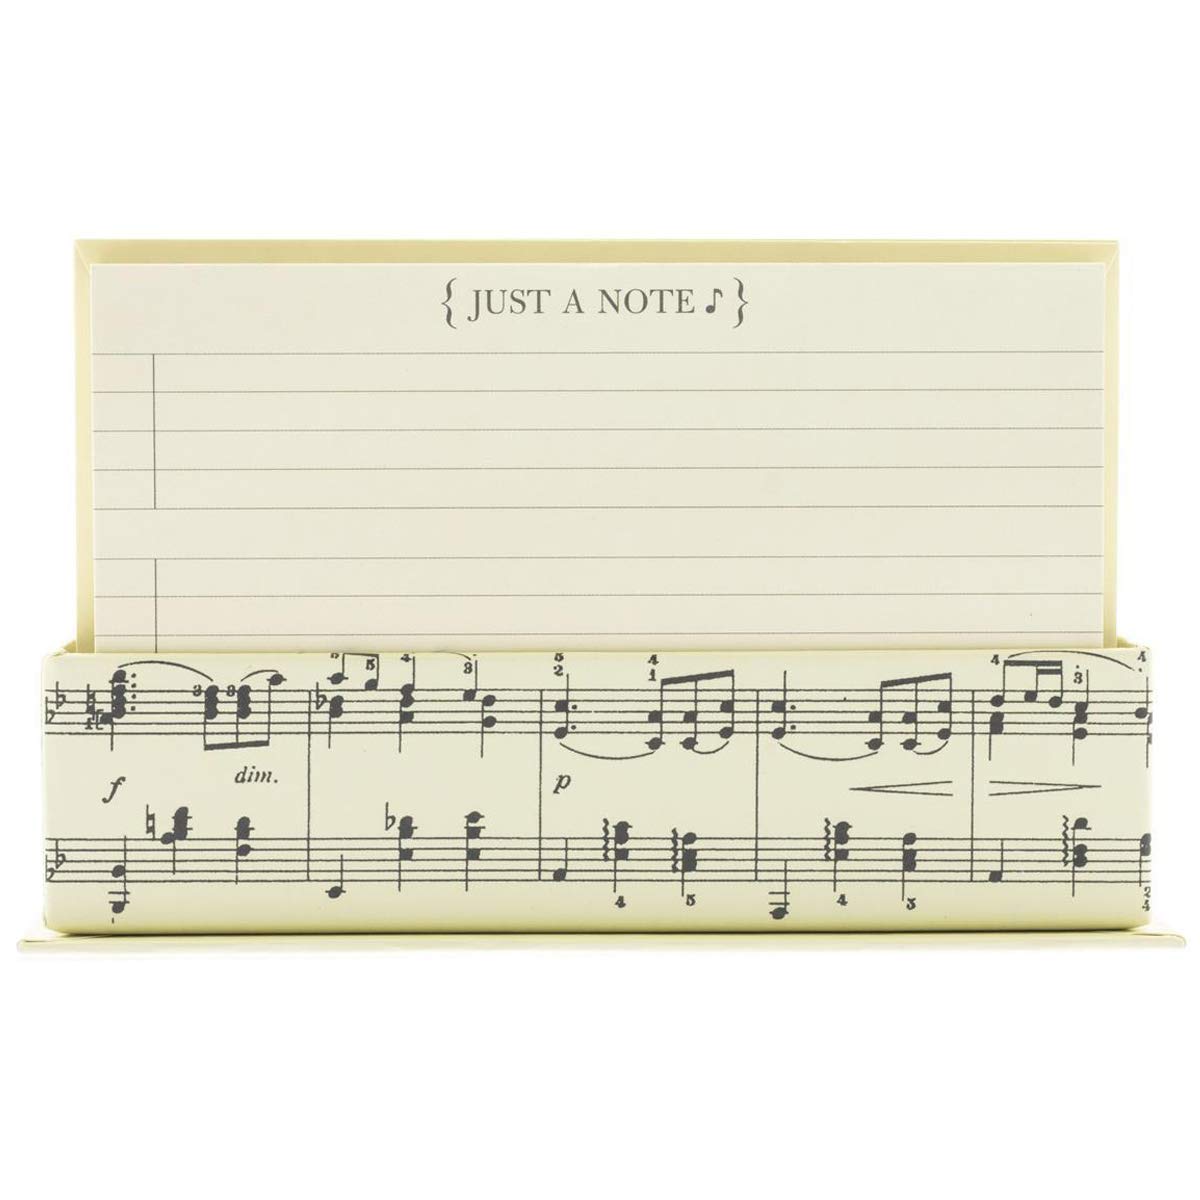 Graphique Flat Note Cards - Musical Stationery Cards with Matching Envelopes and Display Box - Blank Decorative Cards Make Perfect Gifts for Music Lovers - 50 Pack (NT1155MB)